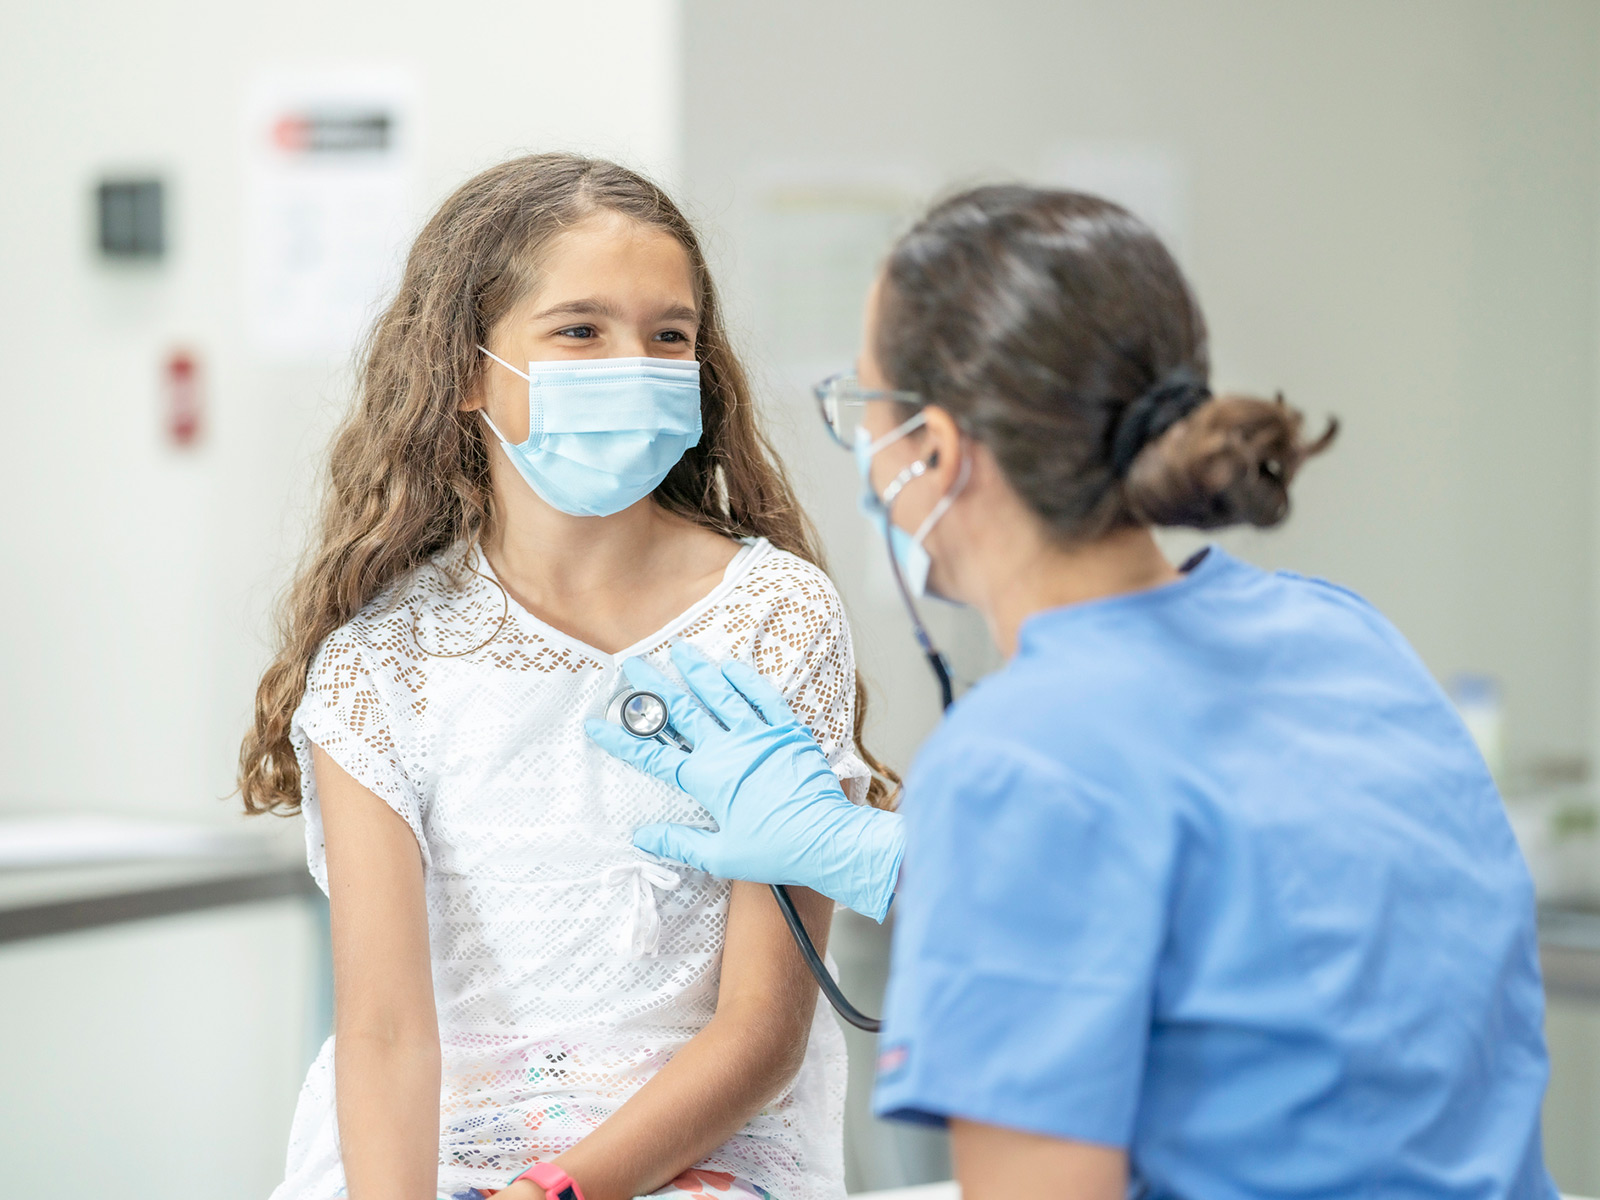 Medicaid healthcare provider with child wearing face masks